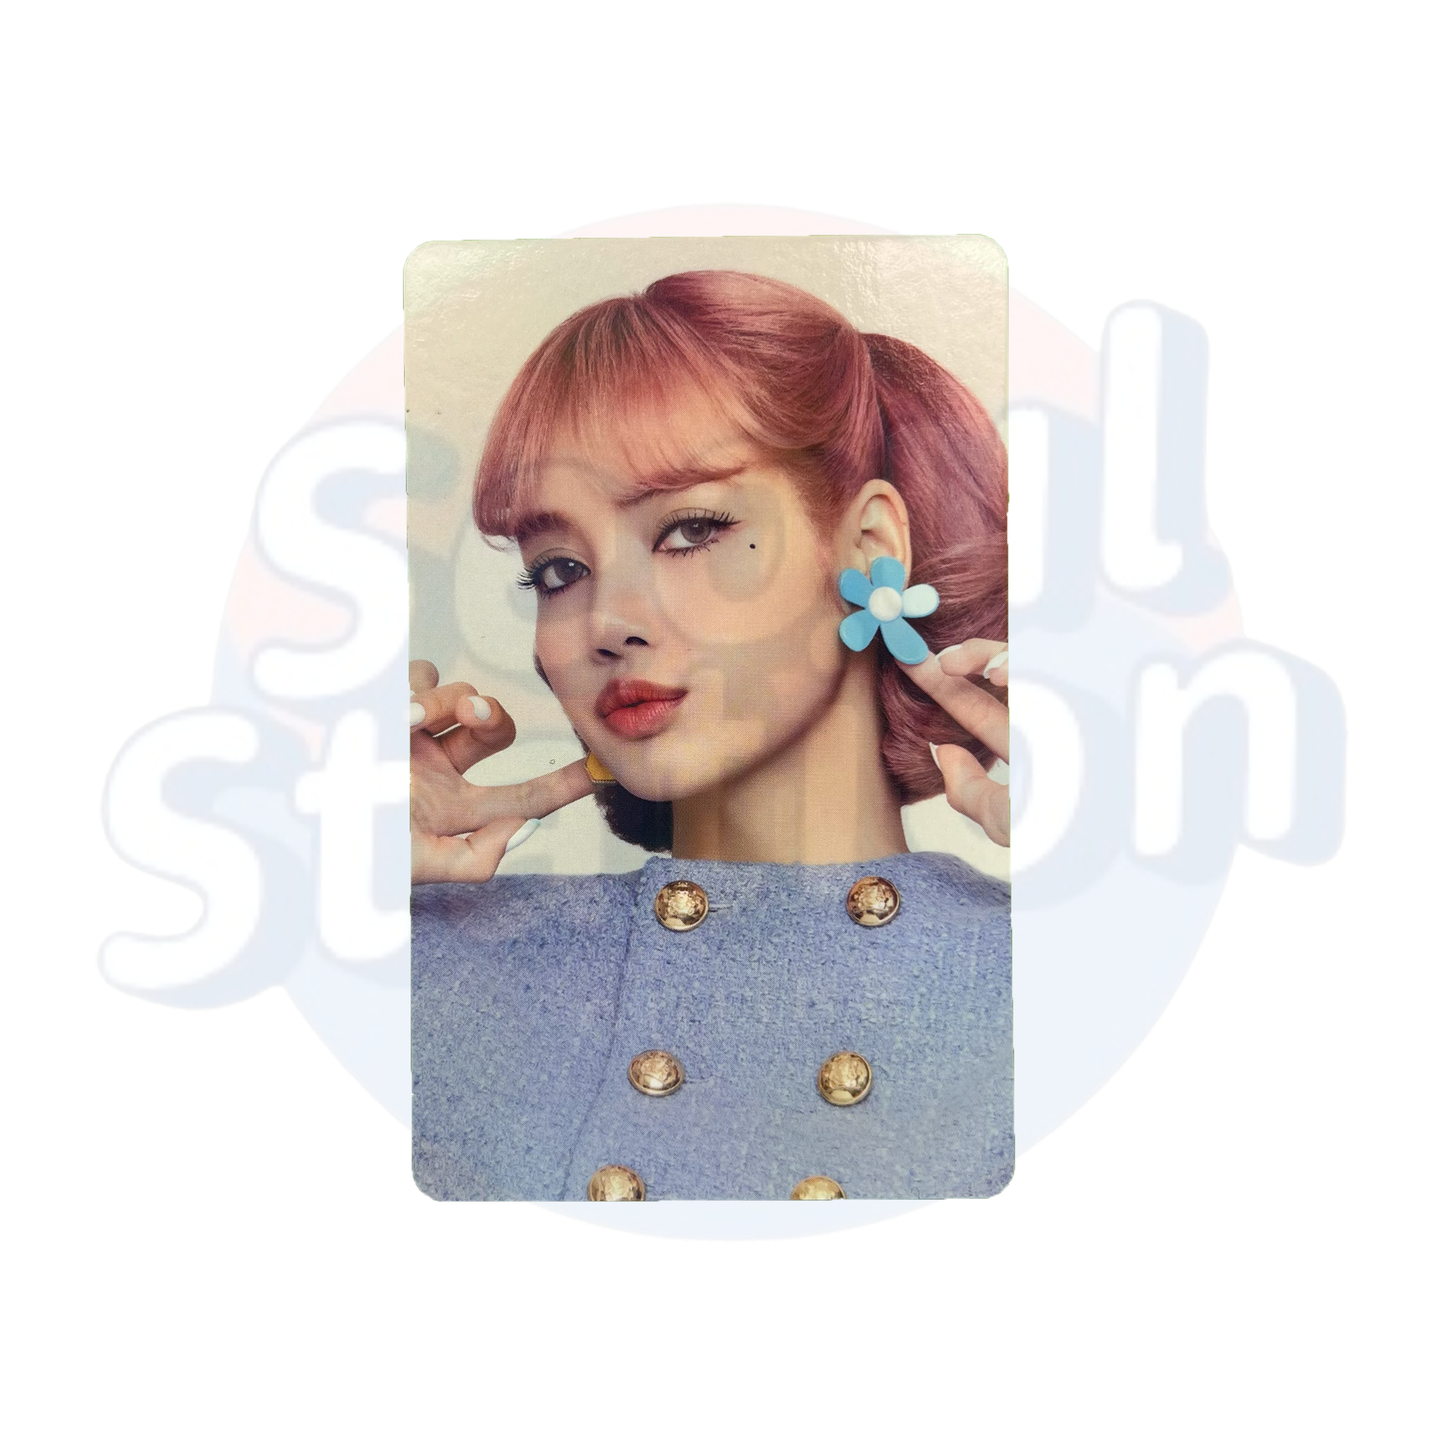 BLACKPINK - 2022 Welcoming Collection - WEVERSE Holo Photo Card Lisa